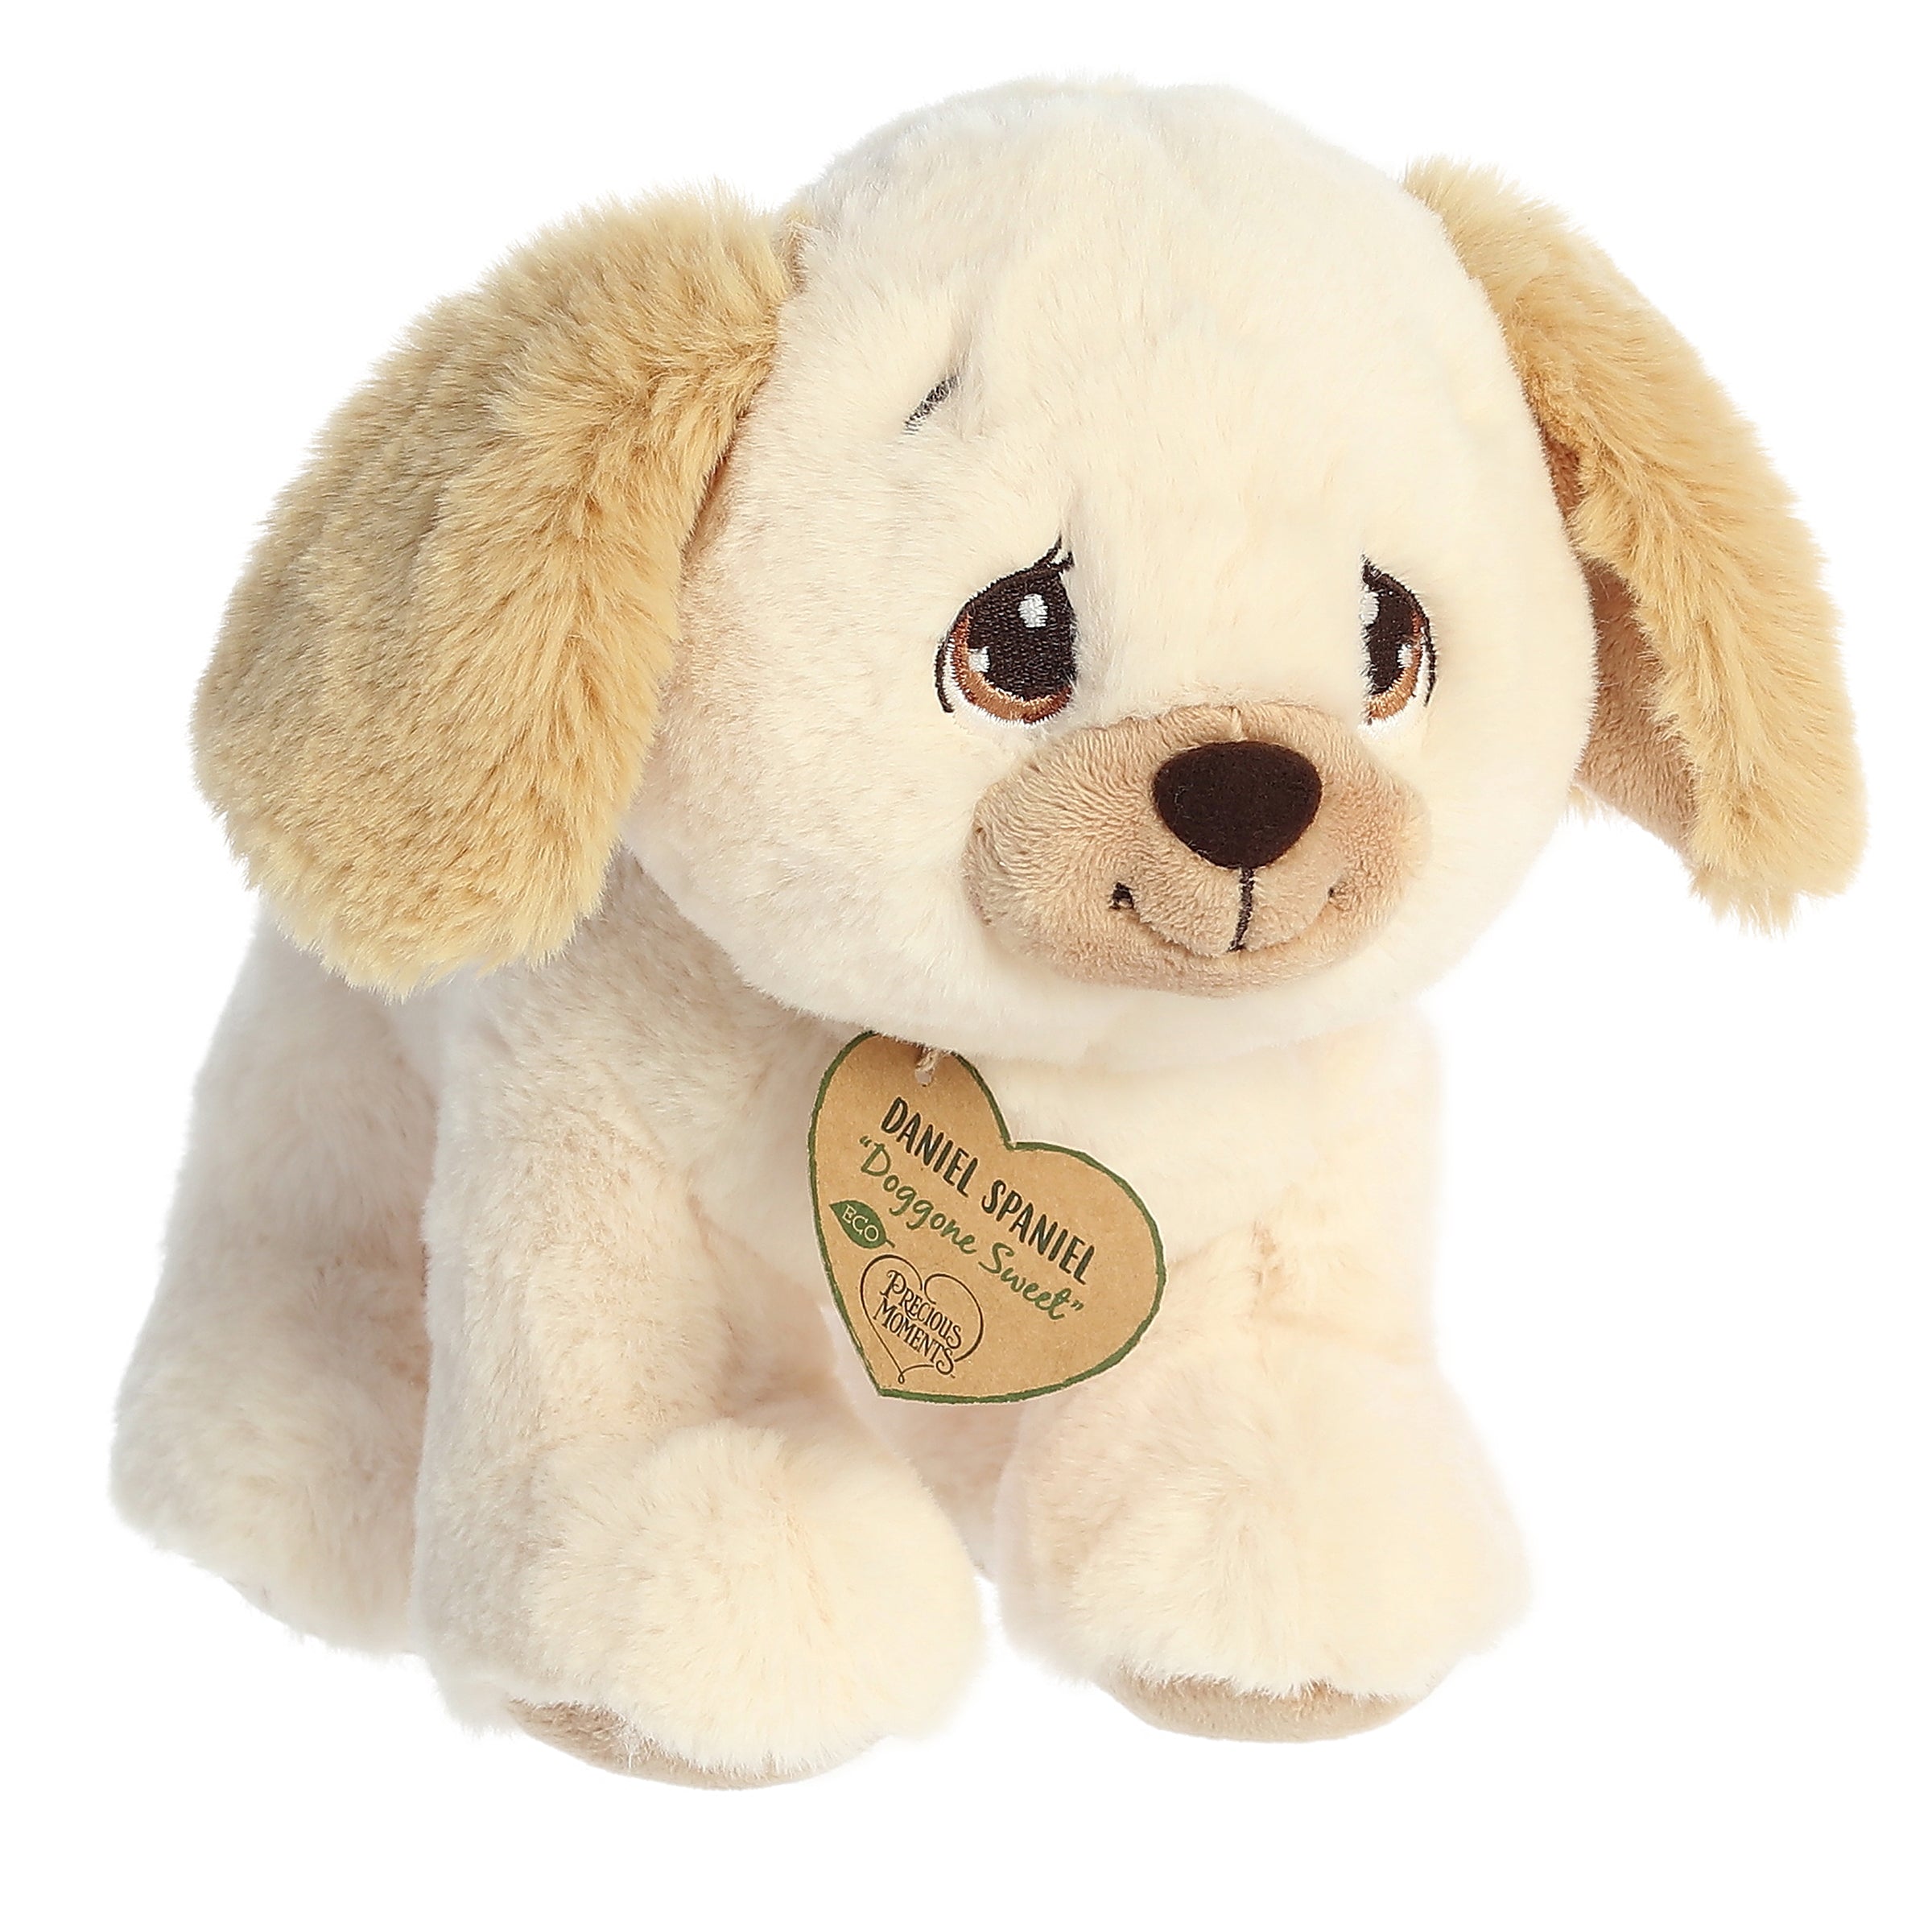 A sitting-down golden terrier dog plush with tear-drop eyes and a precious moments inspirational tag around its neck.